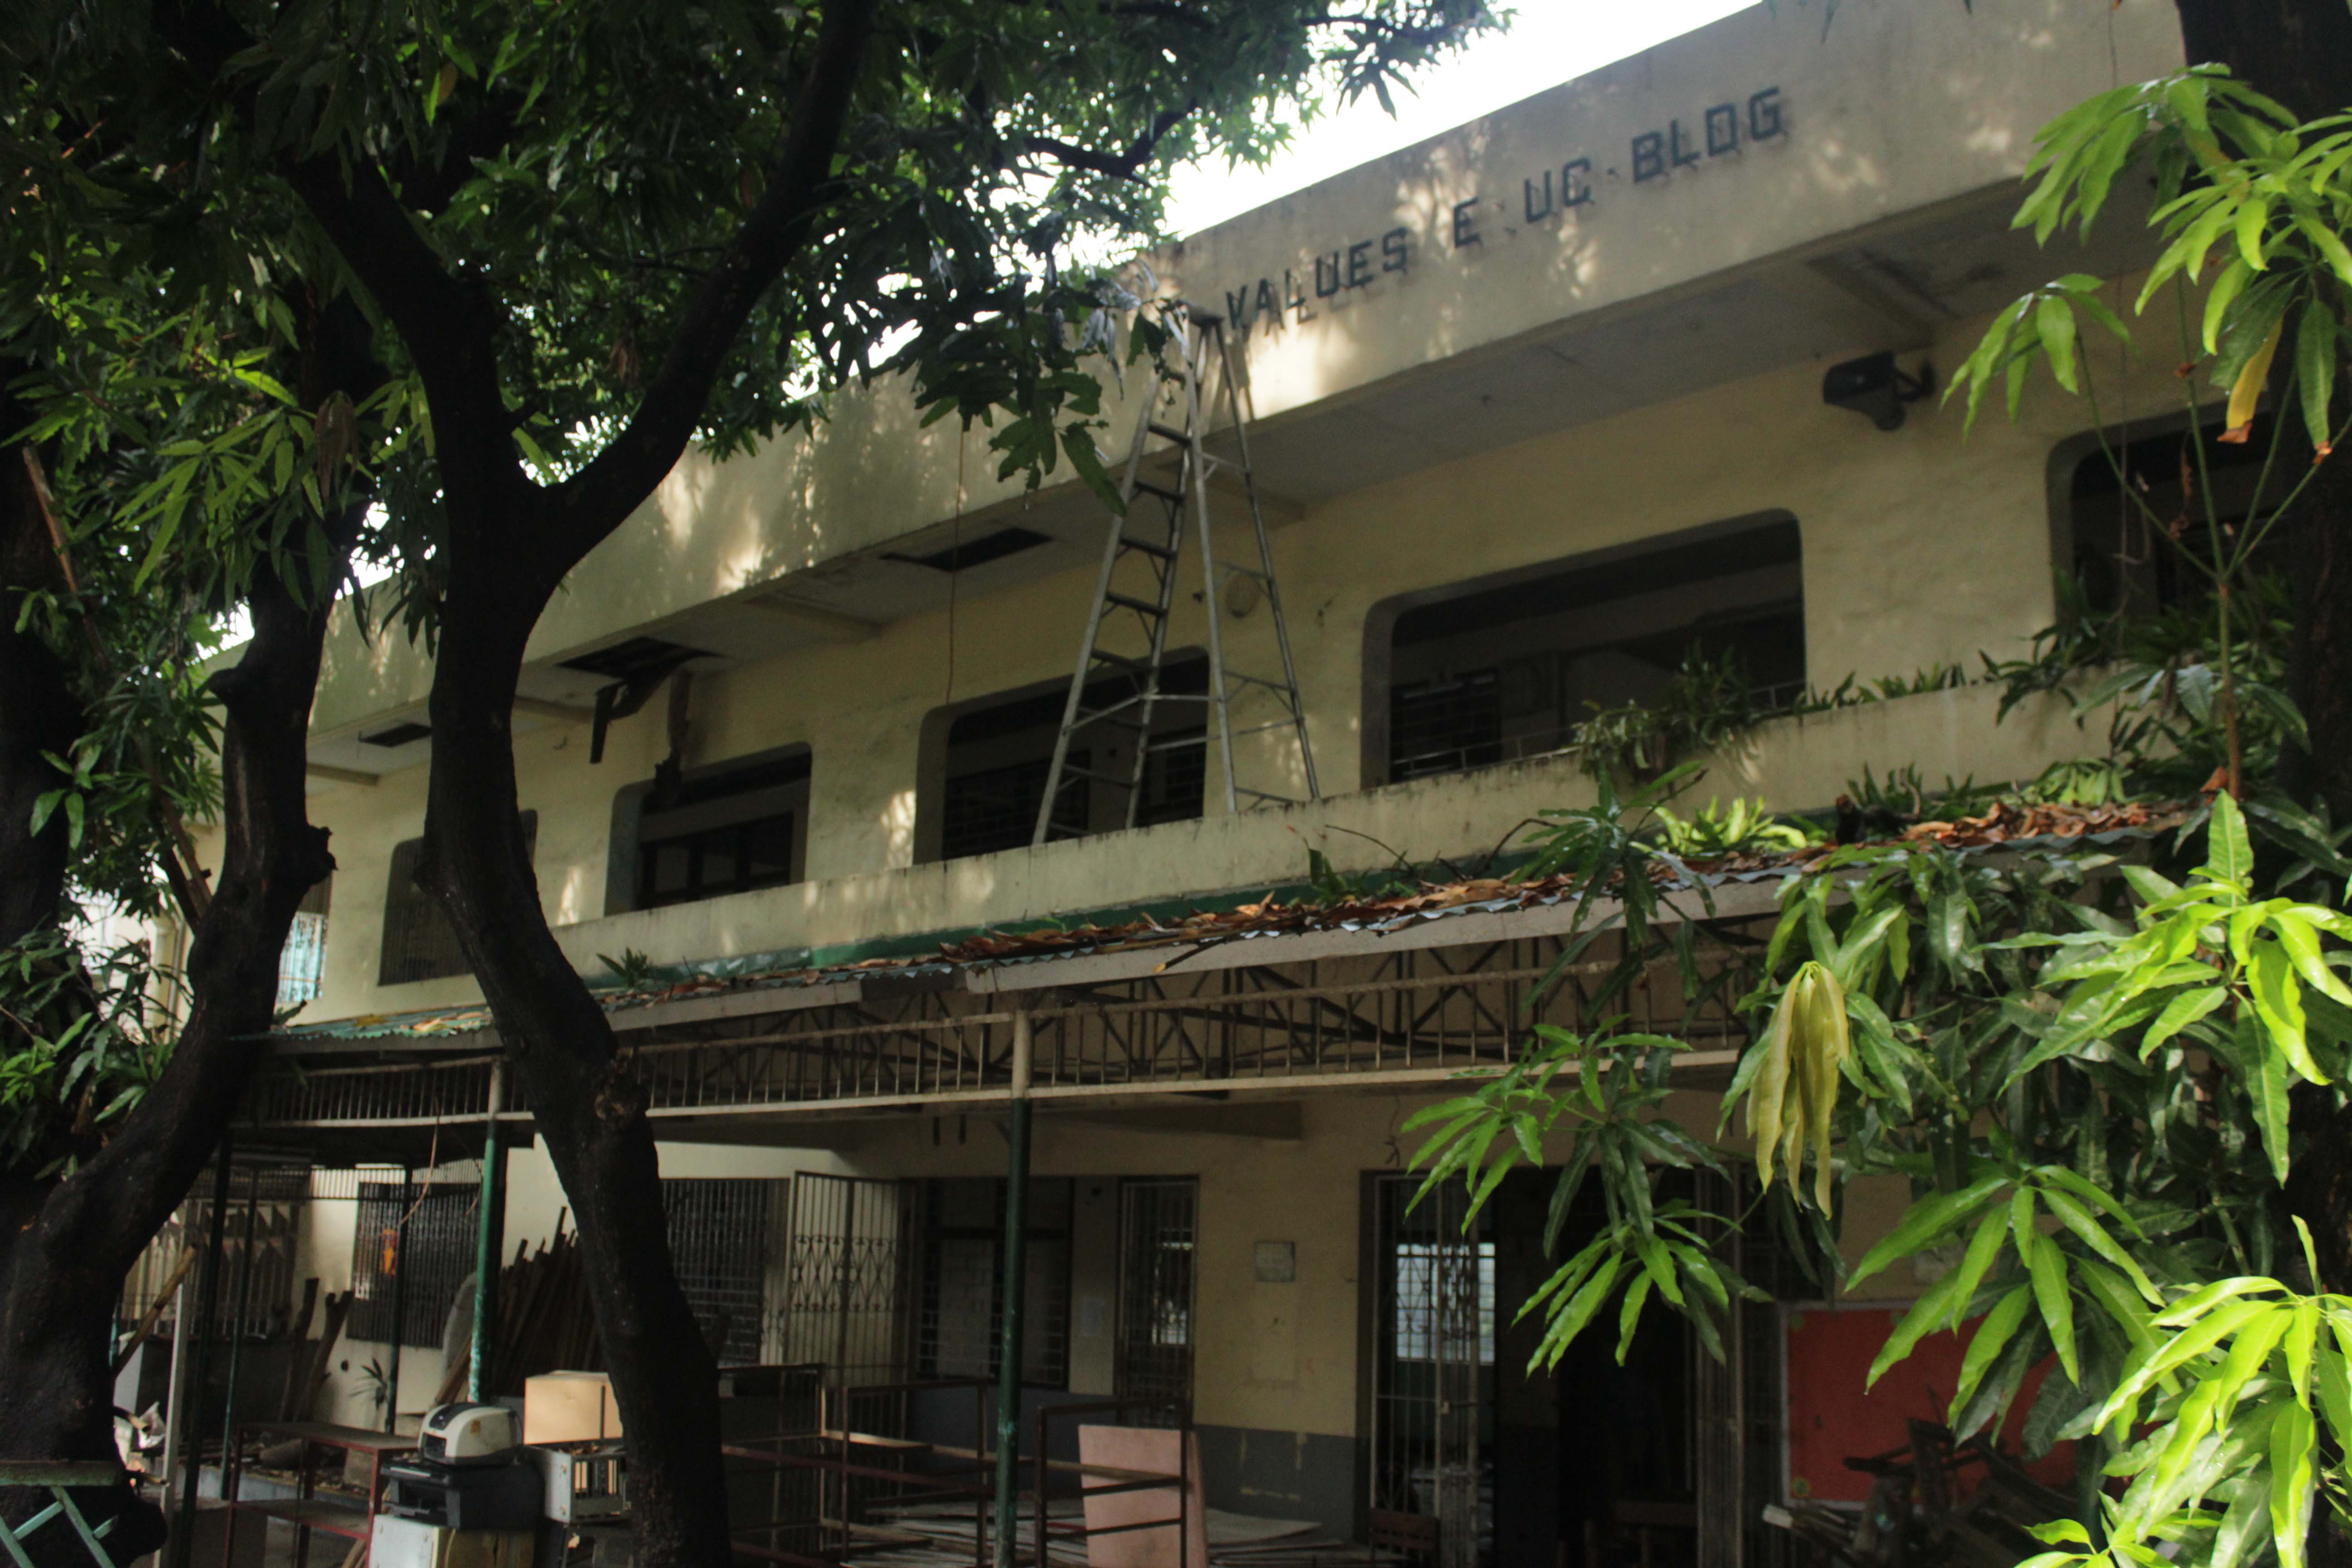 The Values Education building of the Pedro E. Diaz High School is transected at its northwest portion. Demolition of the structure began last May.